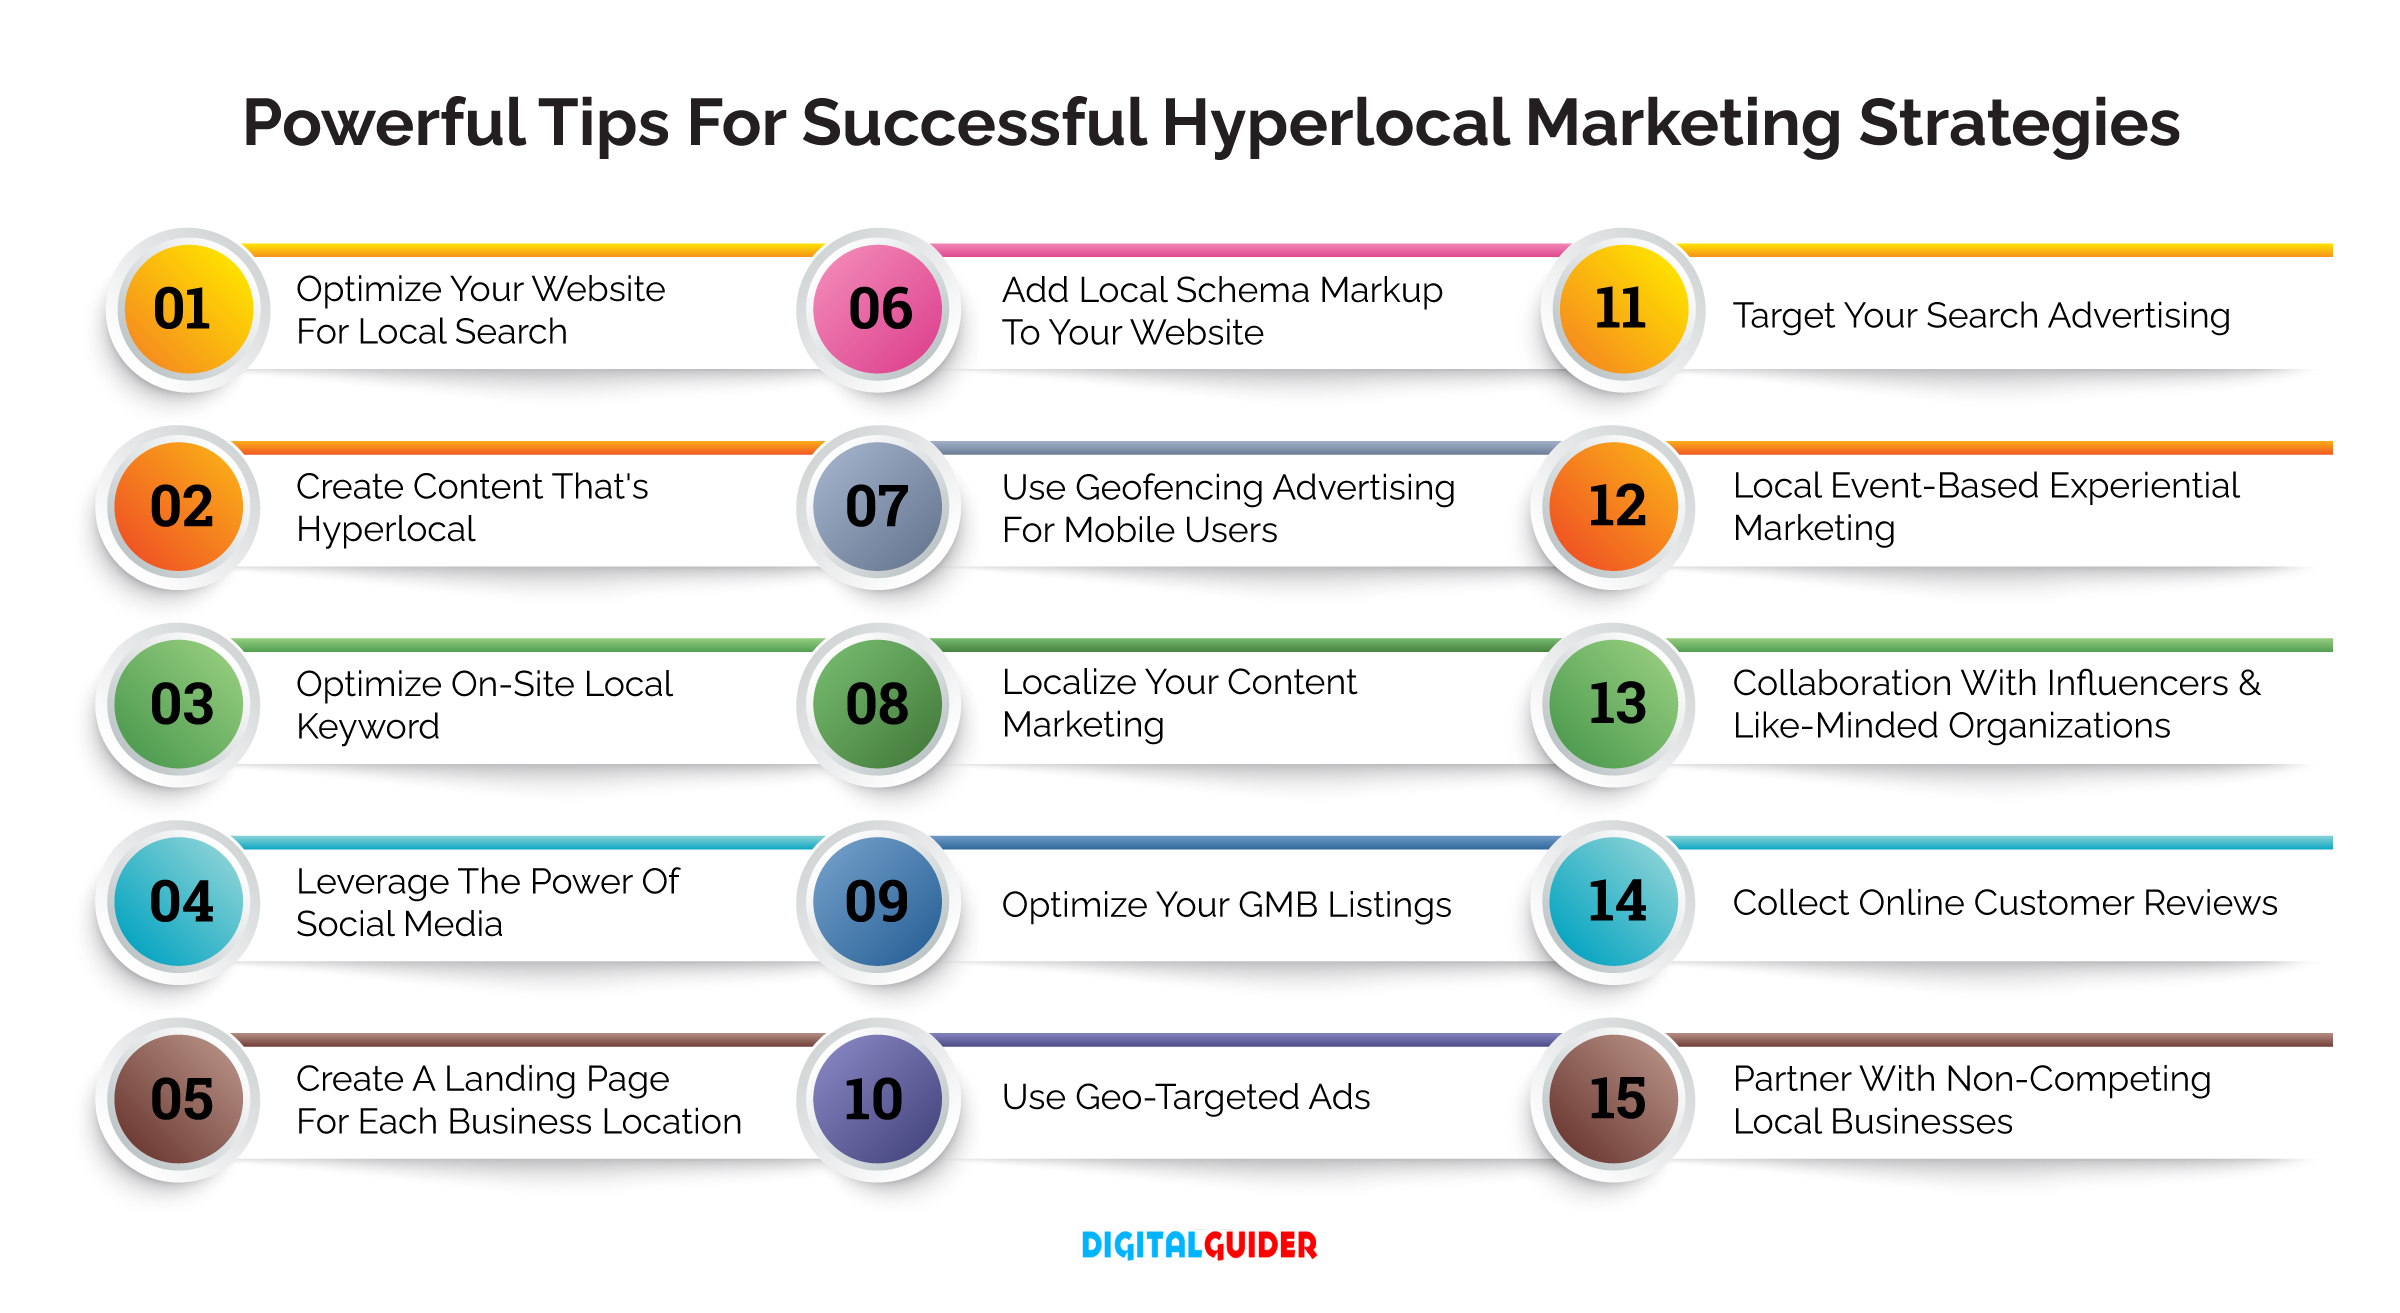 Powerful Tips For Successful Hyperlocal Marketing Strategies